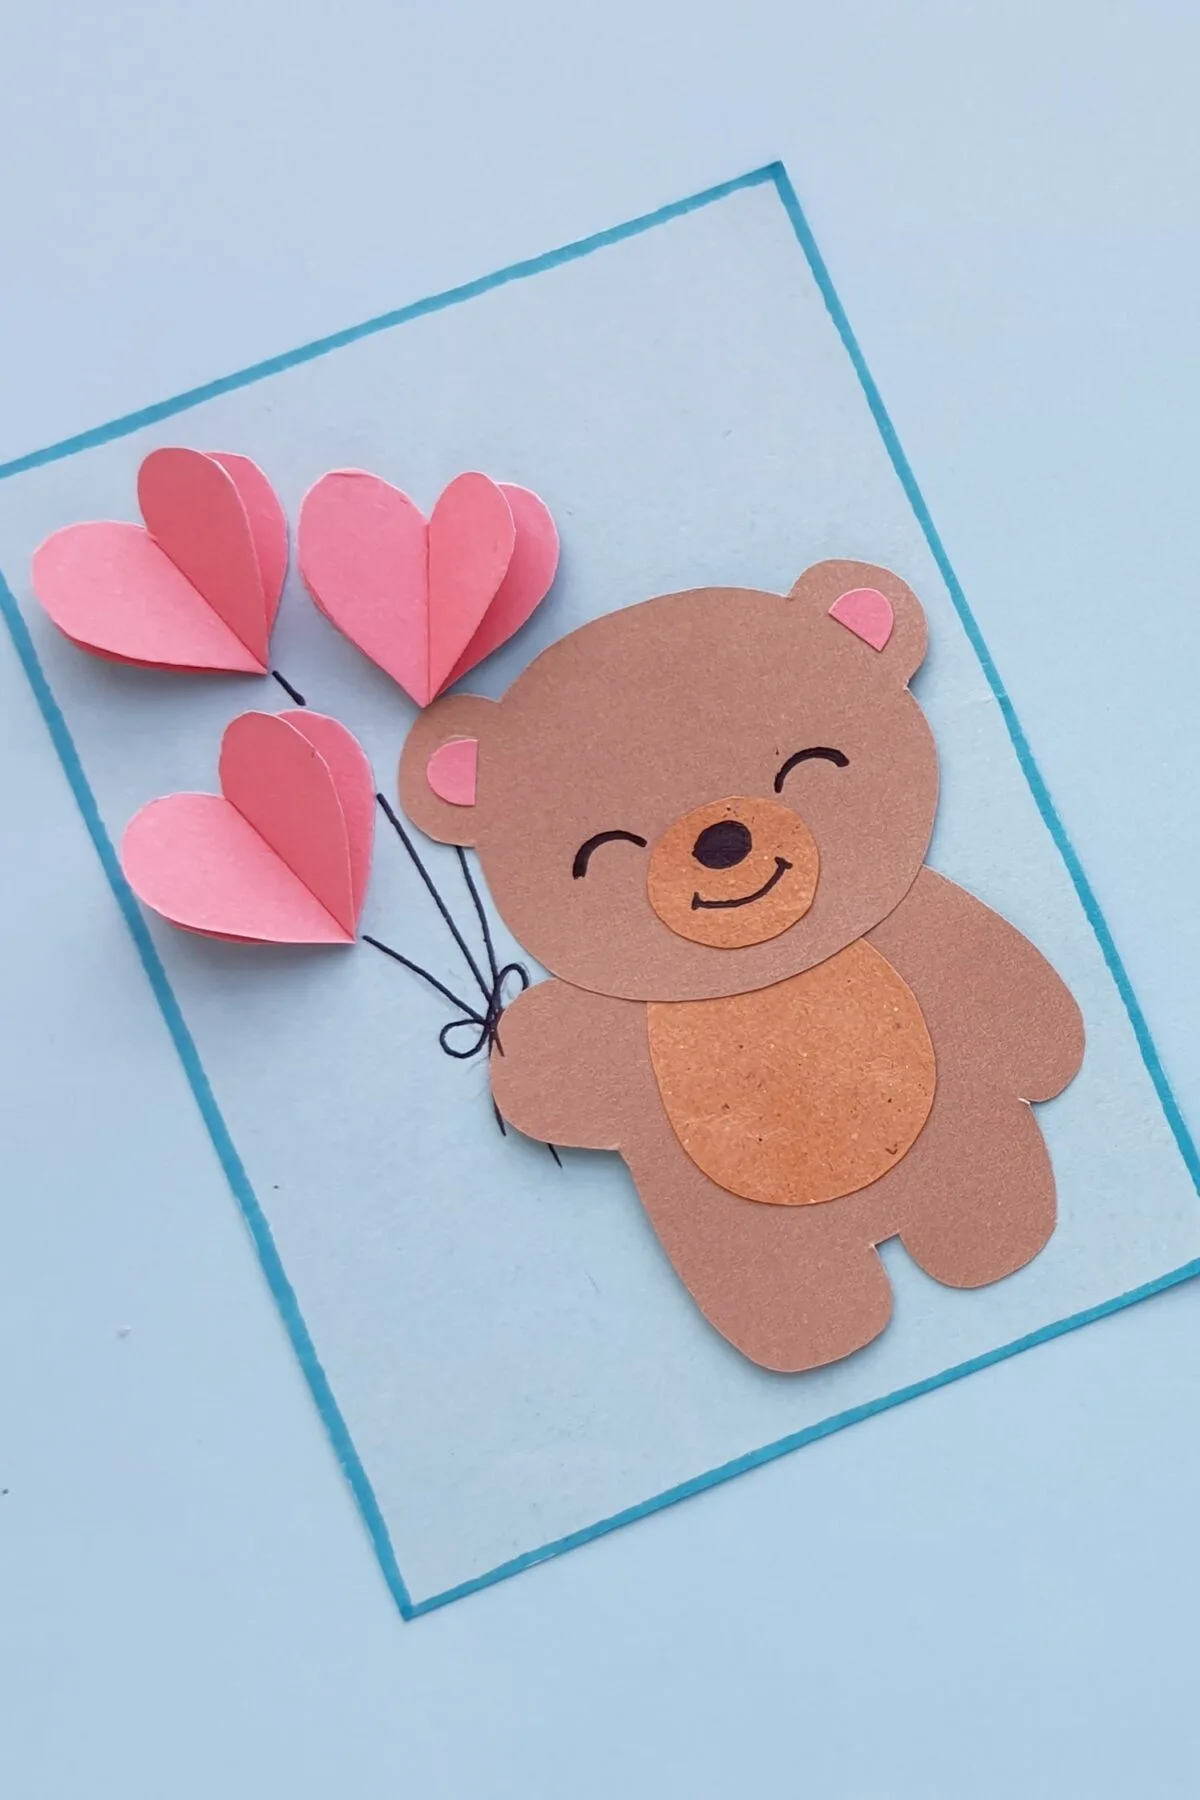 Kids can make a Teddy Bear Valentine's Day Card to give to their friends using construction paper. This craft is an easy activity for kids.